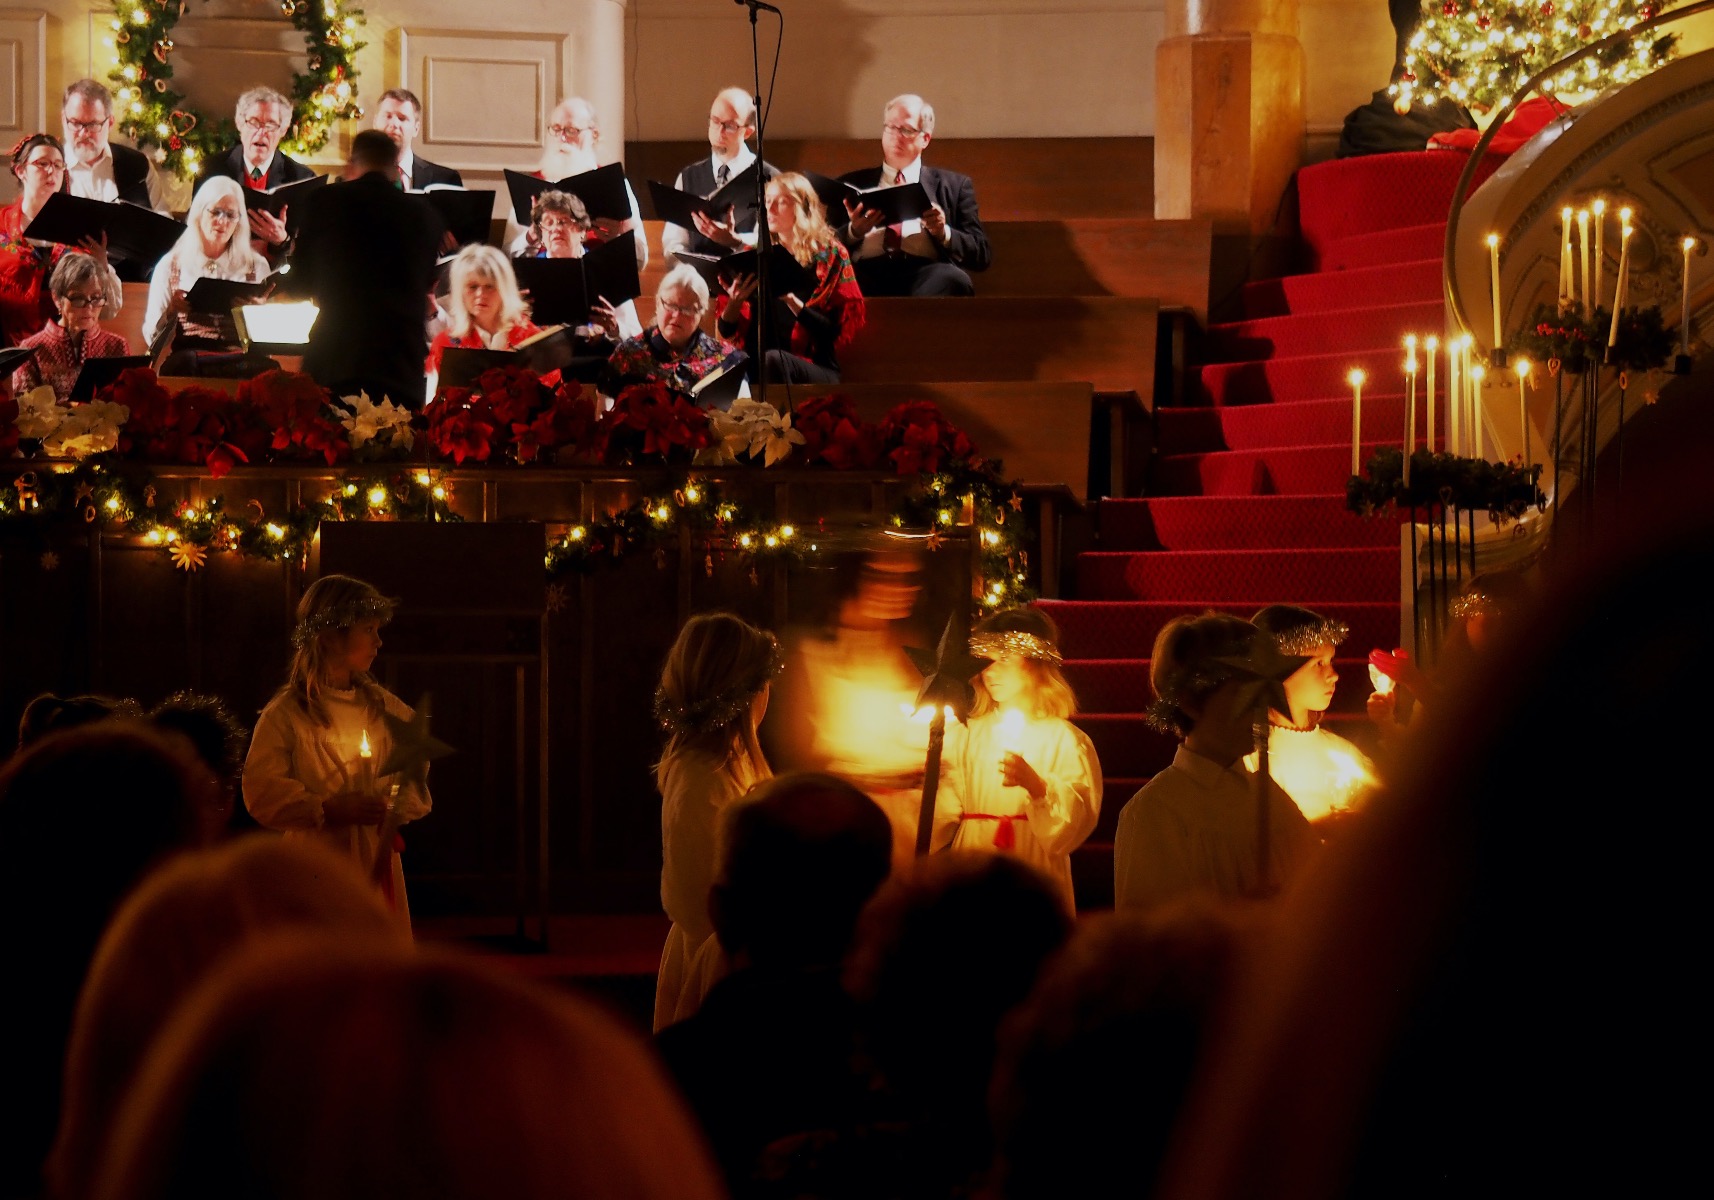 Church singers by candlelight